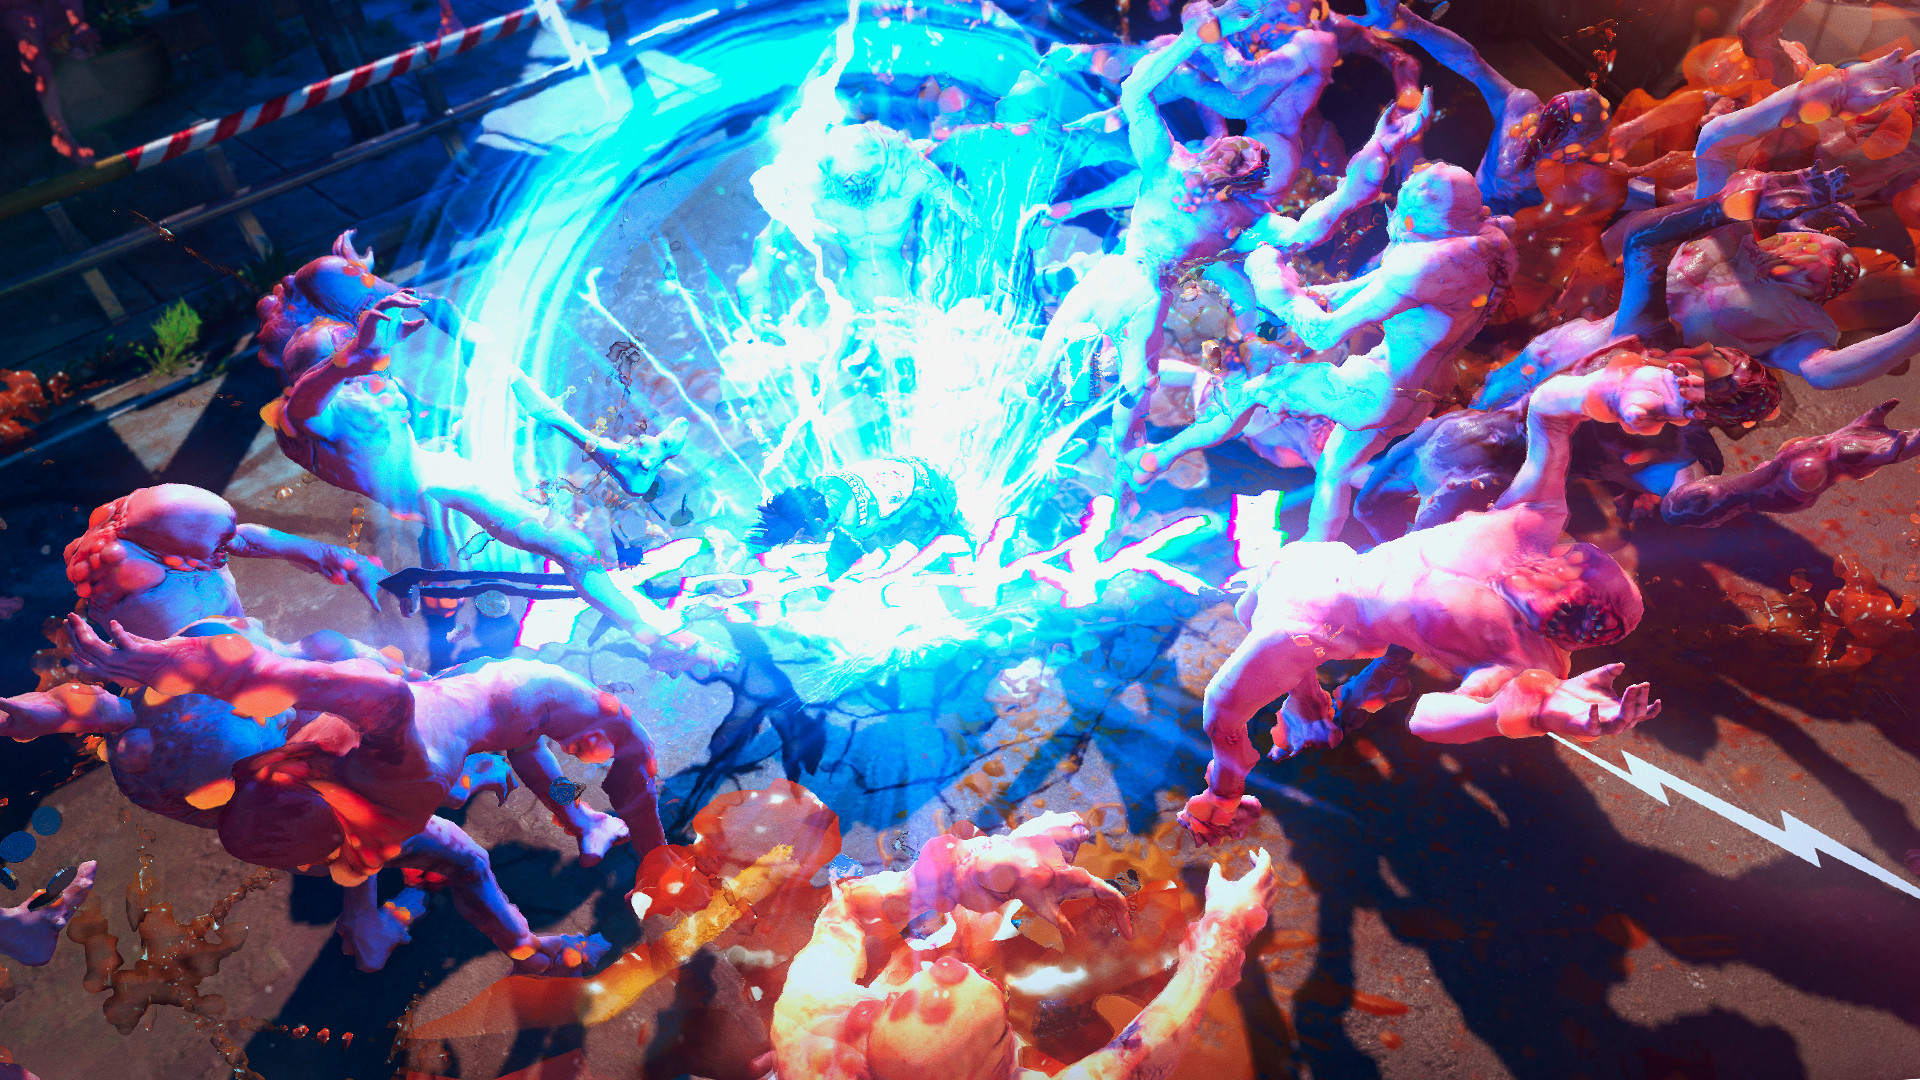 Sunset Overdrive, PC Steam Game